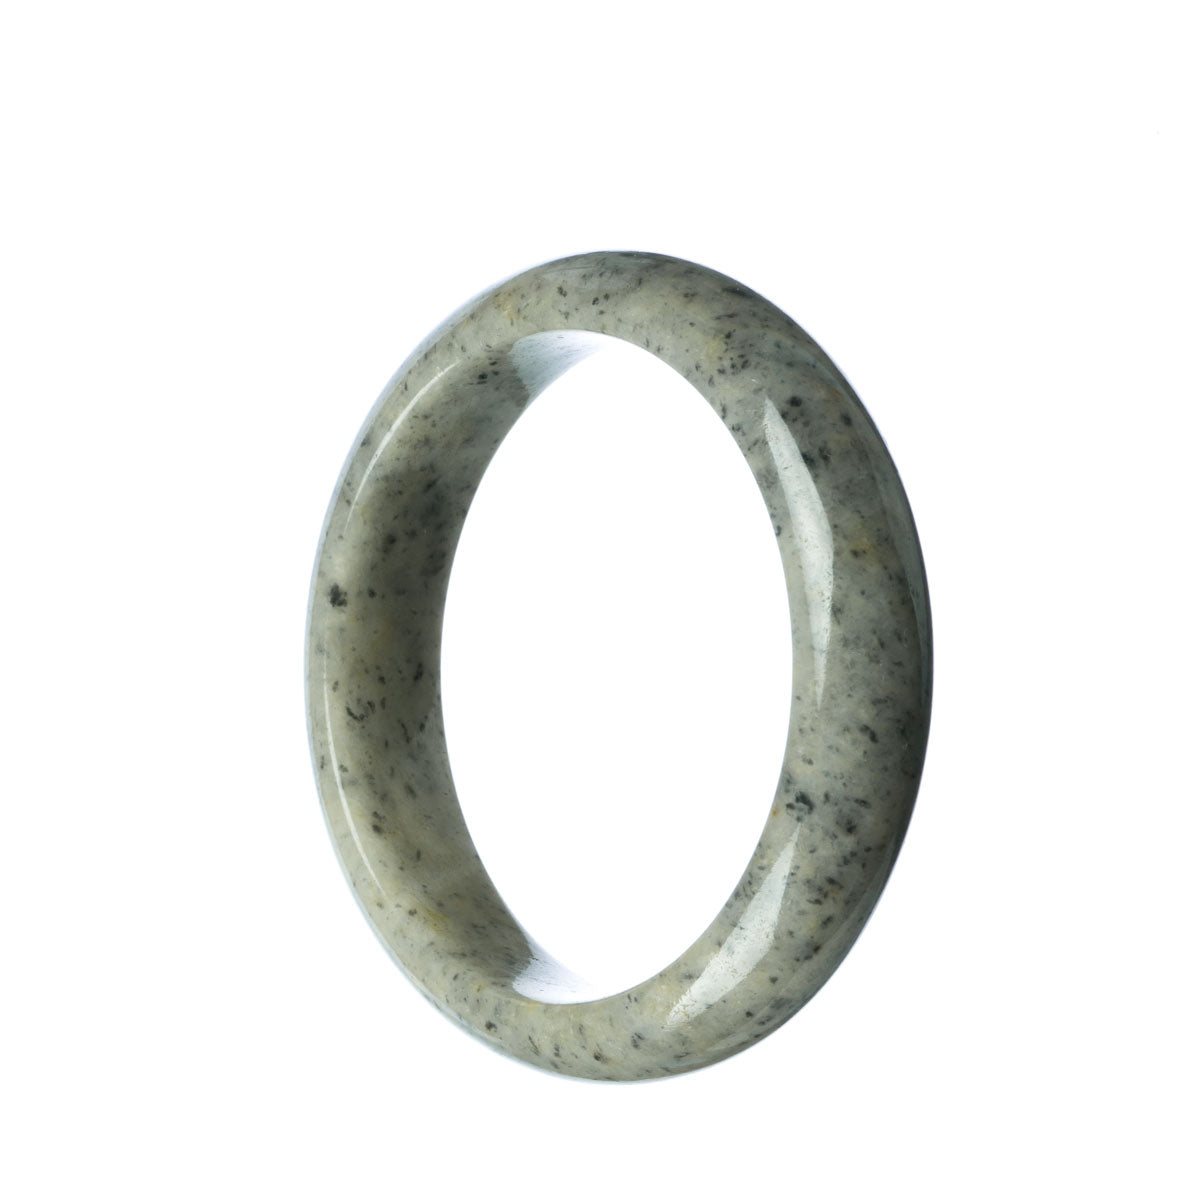 An elegant grey jadeite bracelet with a half moon shape, showcasing its natural and untreated beauty.